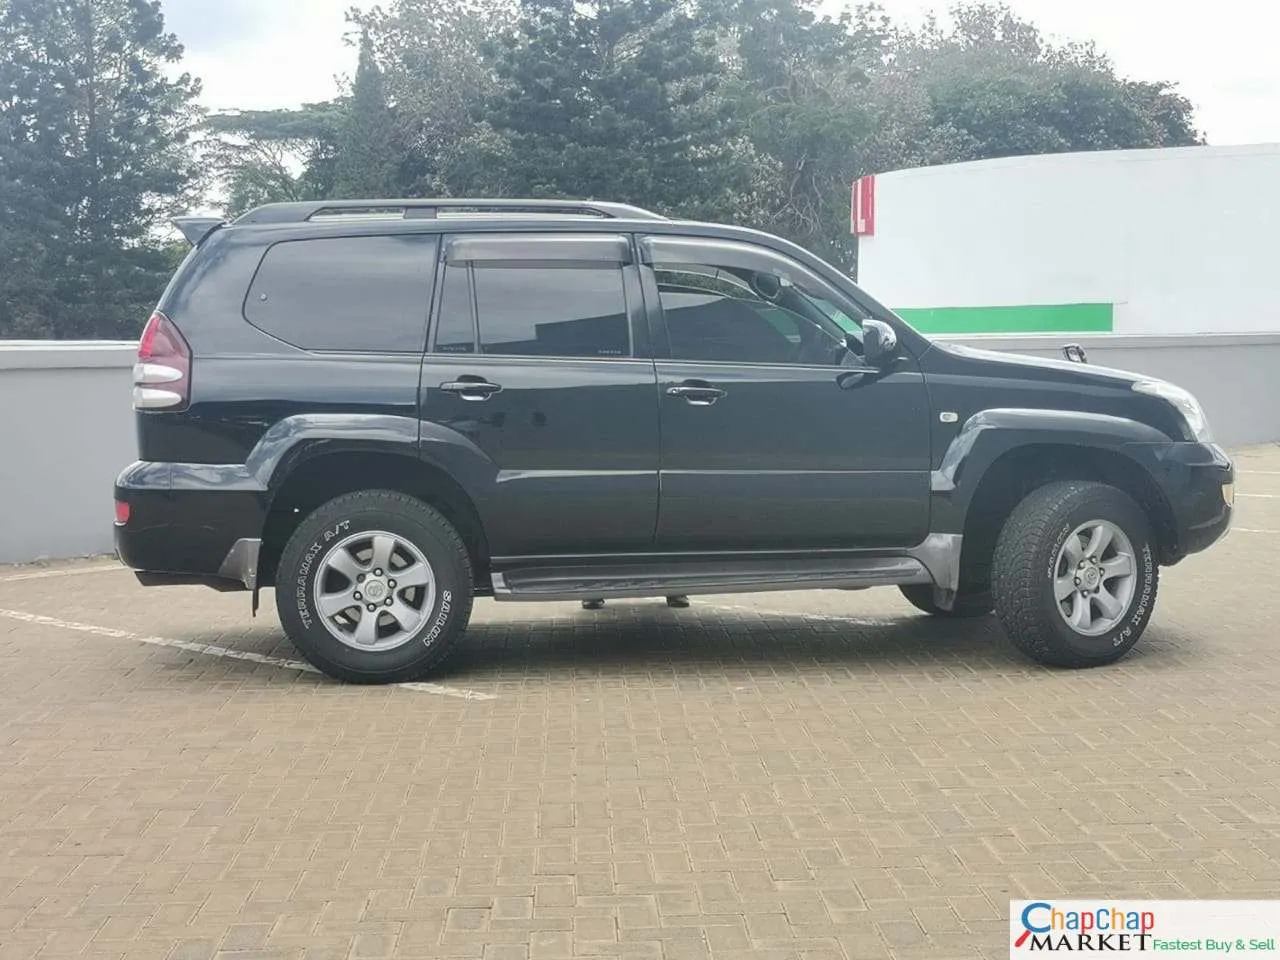 Cars Cars For Sale/Vehicles-Toyota Prado J120 SUNROOF 🔥 You Pay 40% Deposit Trade in OK EXCLUSIVE 9